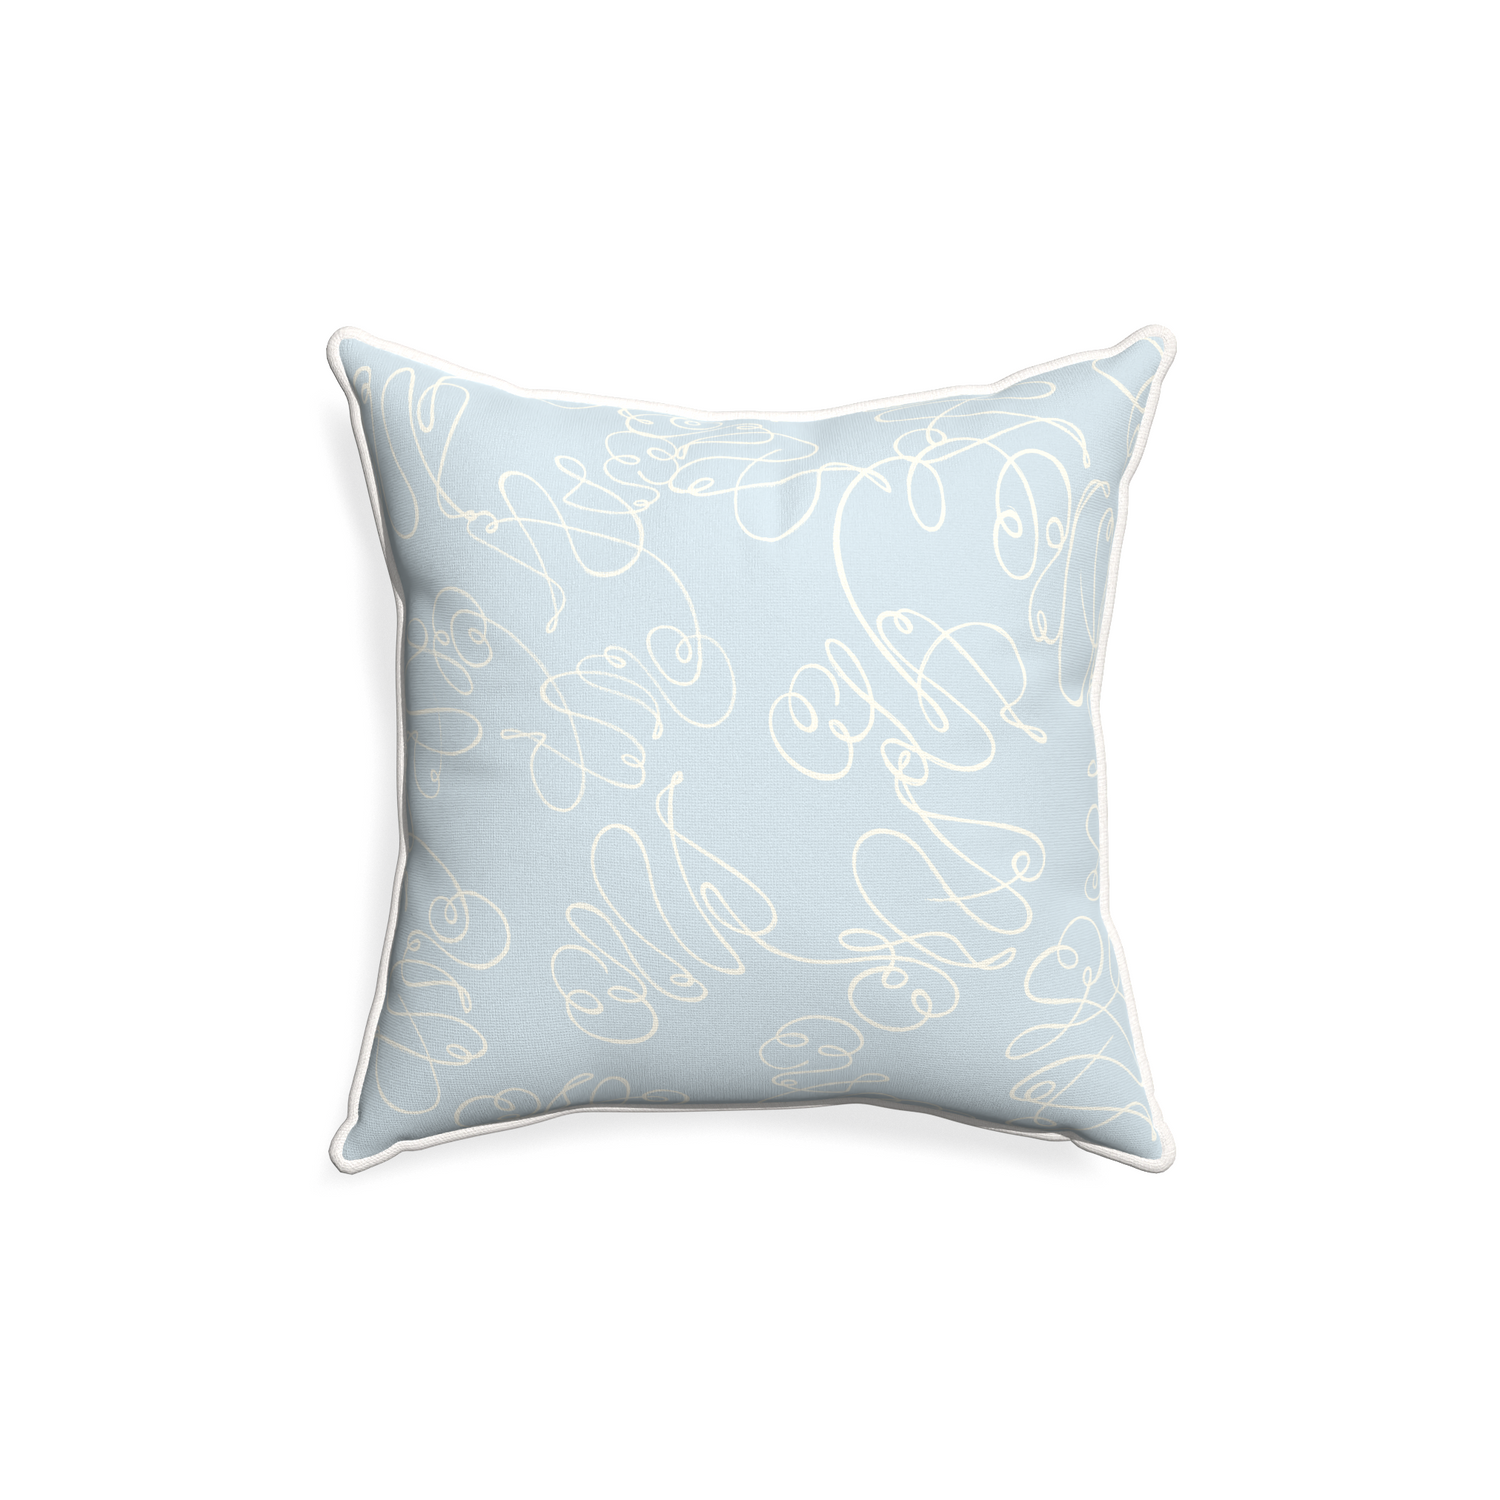 18-square mirabella custom pillow with snow piping on white background